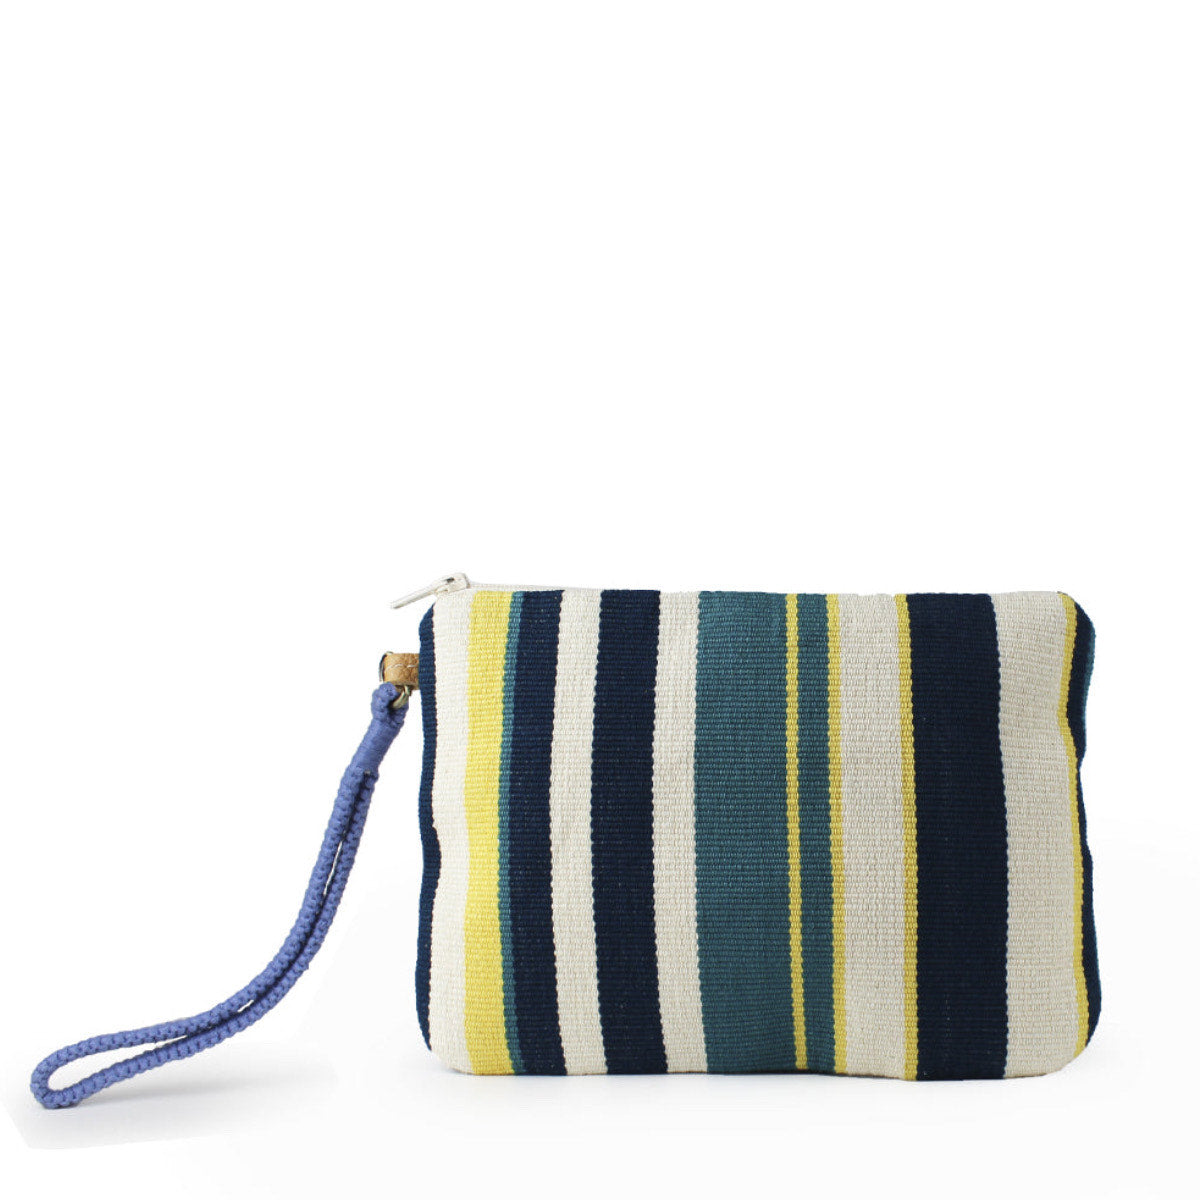 Front of the hand woven artisan Mini Lily Wristlet Clutch in Denim Pacific. The front pattern has vertical dark blue, turquoise, and lemon yellow stripes. It has a woven blue hand strap.